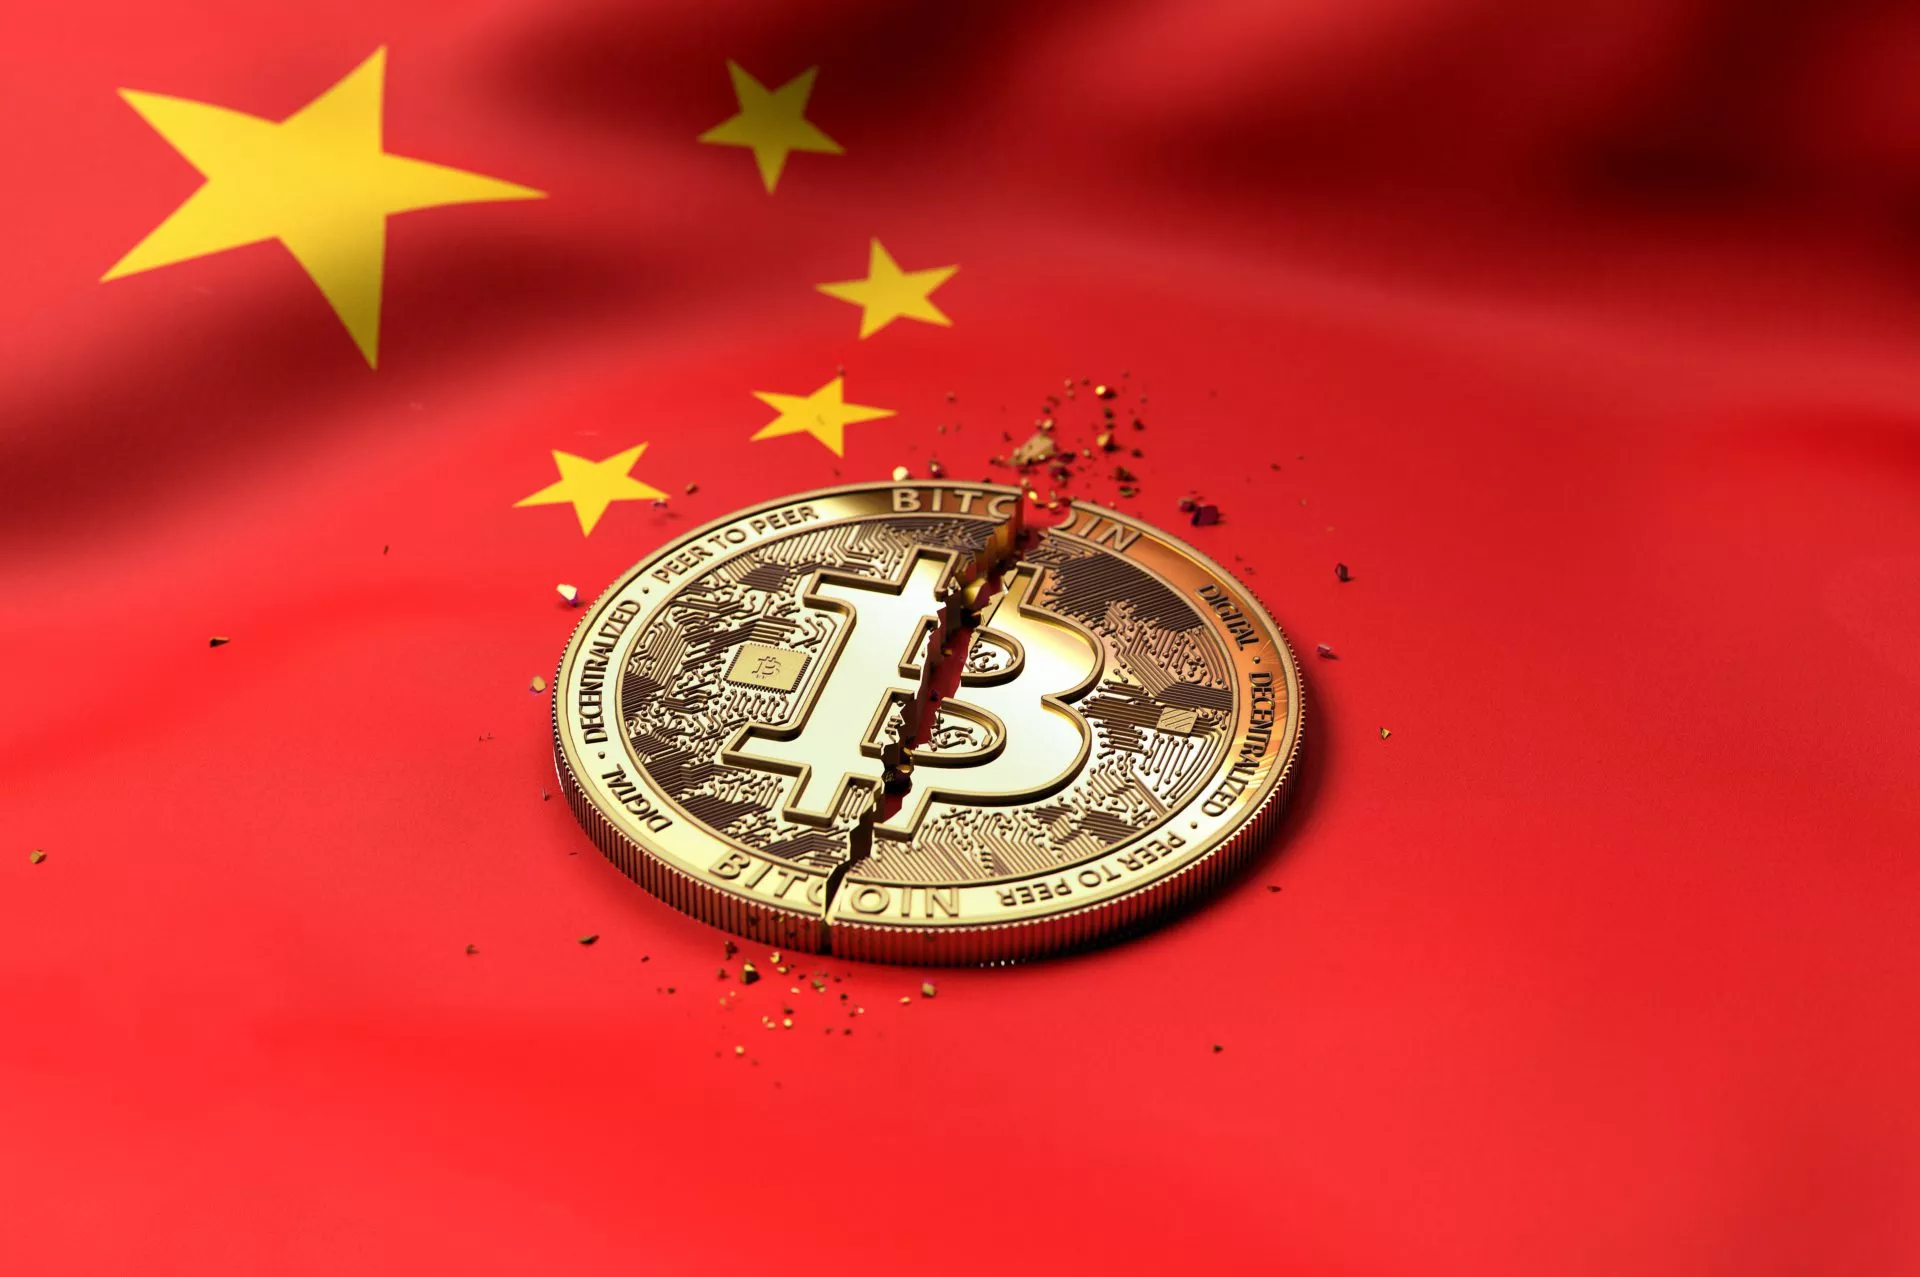 Chinese centrale bank maakt alle crypto transacties illegaal